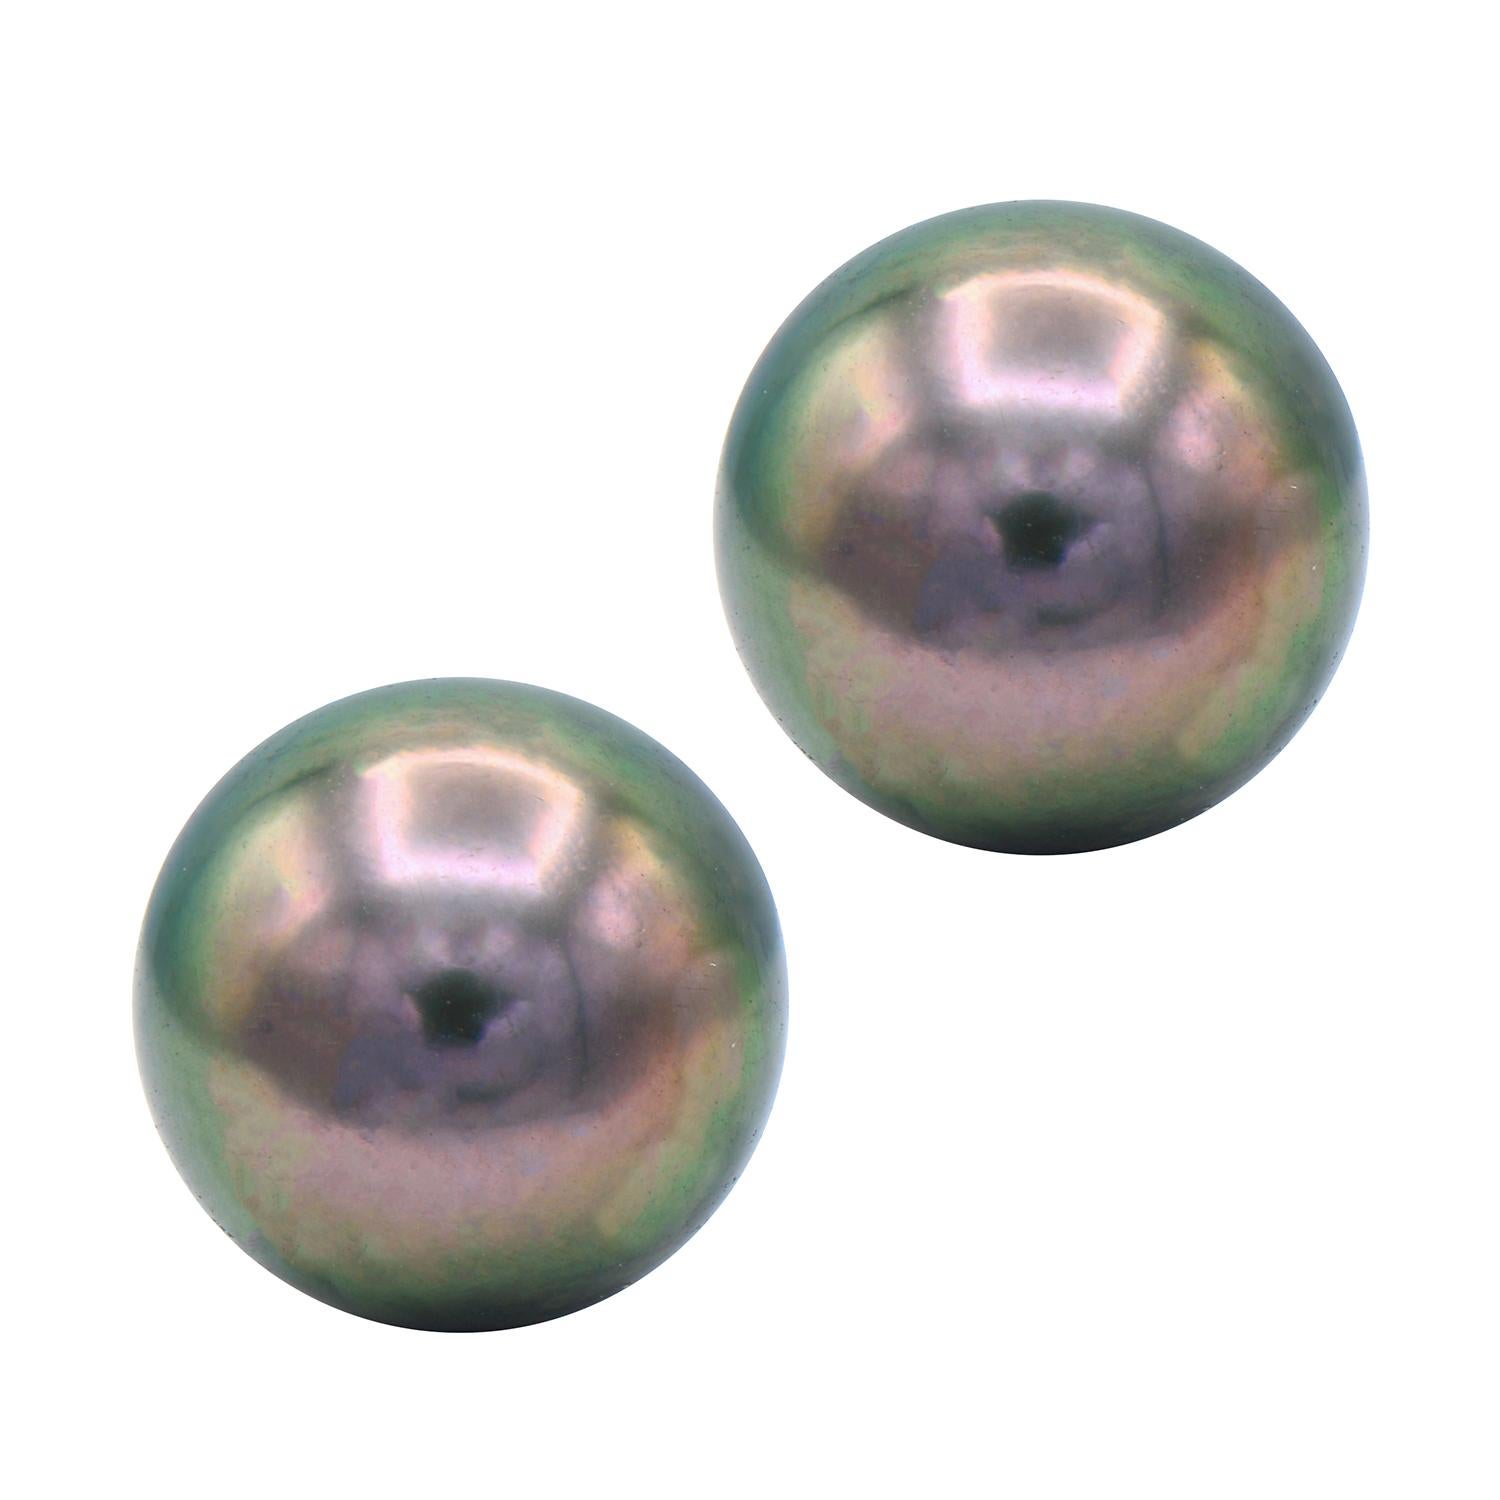 Tahitian Pearl Studs give a little twist to the classic white pearl studs. The Tahitian Pearl Studs are expertly matched in color, luster, and size to make a perfect pair. These 11-11.5mm beautiful pearls are set in 14 karat white gold.